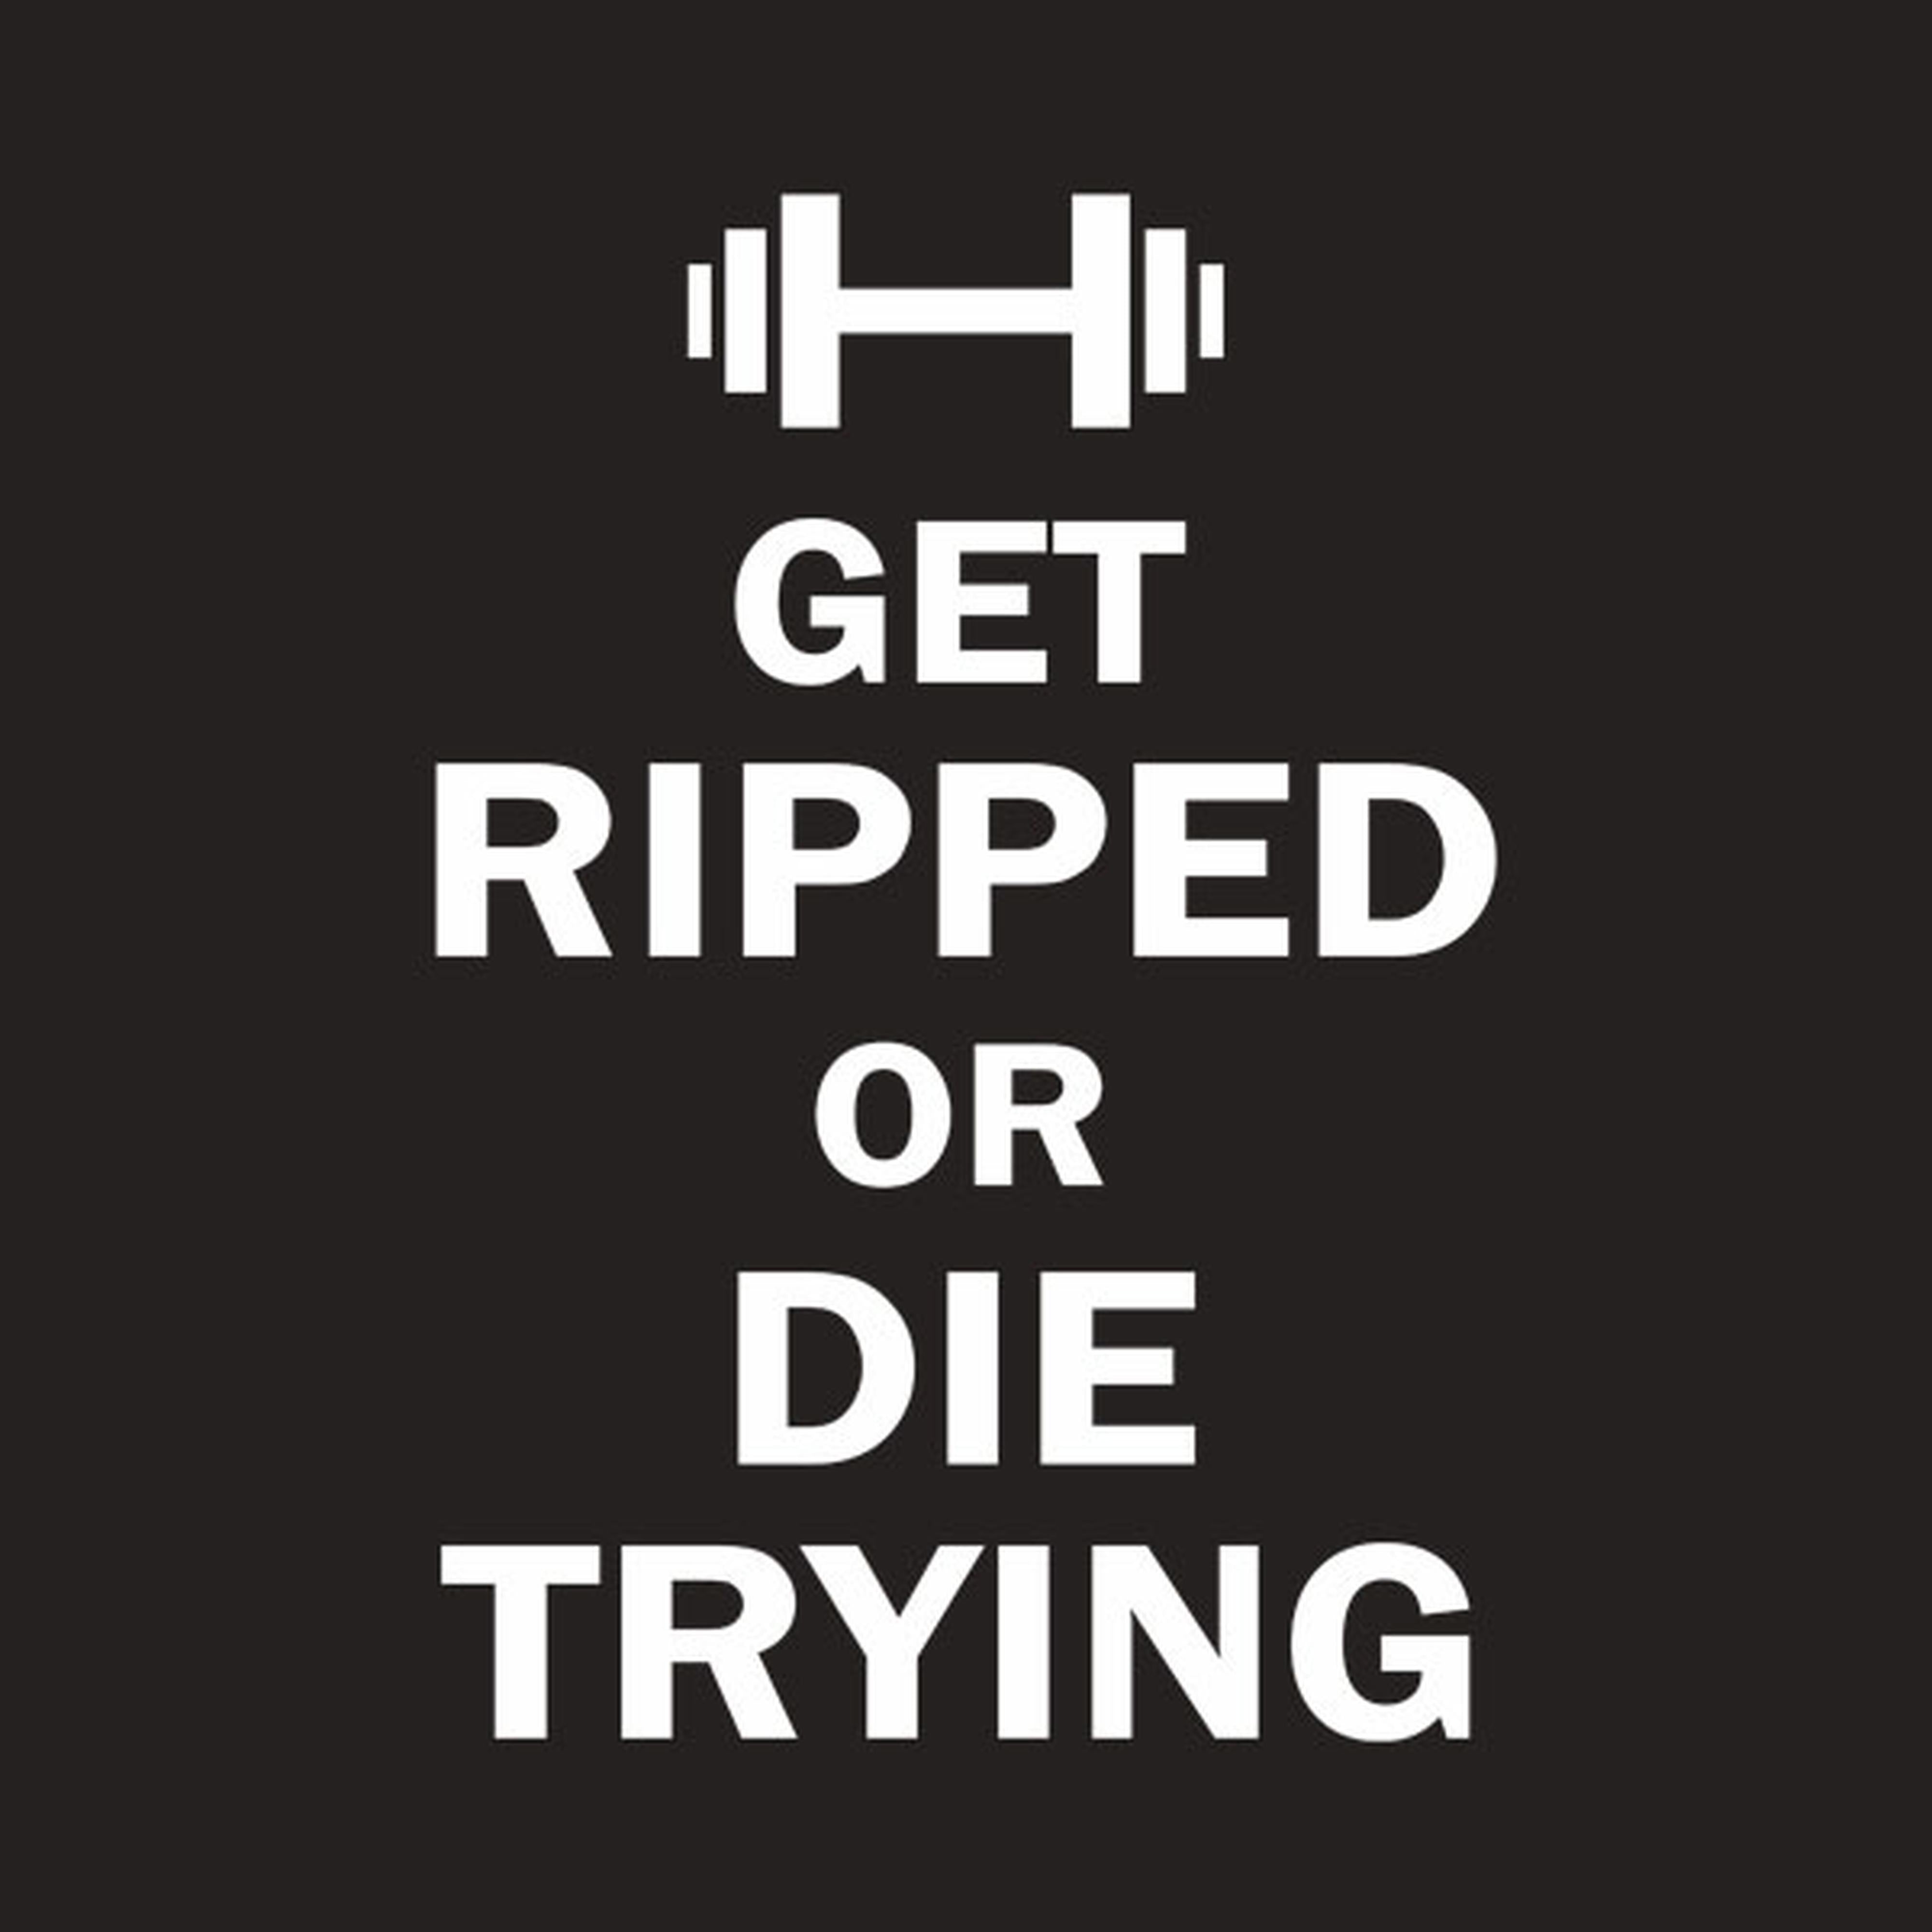 Get ripped or die trying - T-shirt